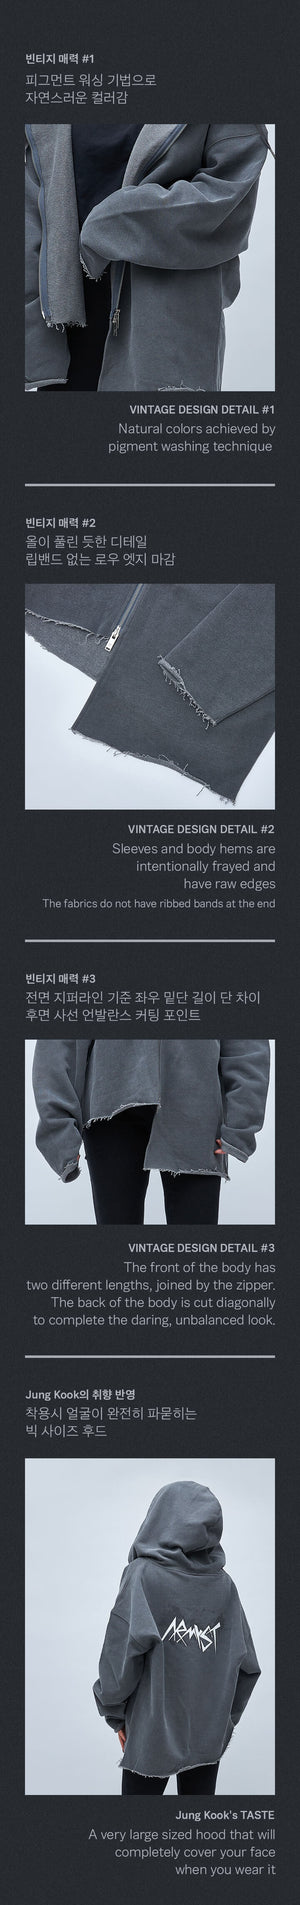 [4TH PRE-ORDER] ARTIST-MADE COLLECTION BY BTS JUNGKOOK - COKODIVE